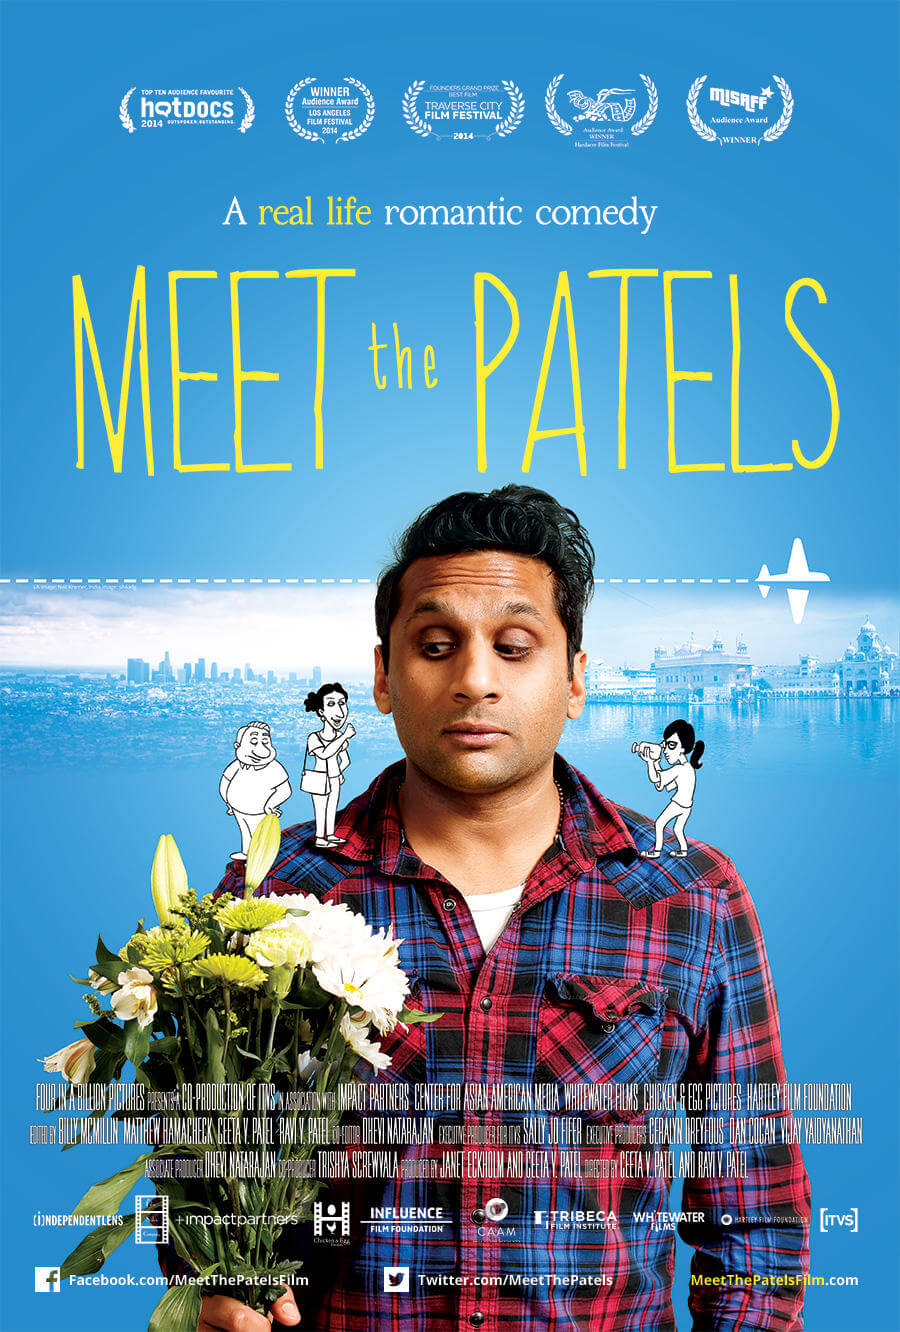 Meet the Patels movie poster. At the top of the poster are festival logos followed by text that reads, "A real life romantic comedy" and the title of the movie, Meet the Patels. The poster is blue with a skyline in the background. A man in a blue and red plaid button up shirt holds a bouquet of white and green flowers. There are two hand drawn, cartoon characters on his shoulders–one man and one woman on his left, one woman with a camera on his right.